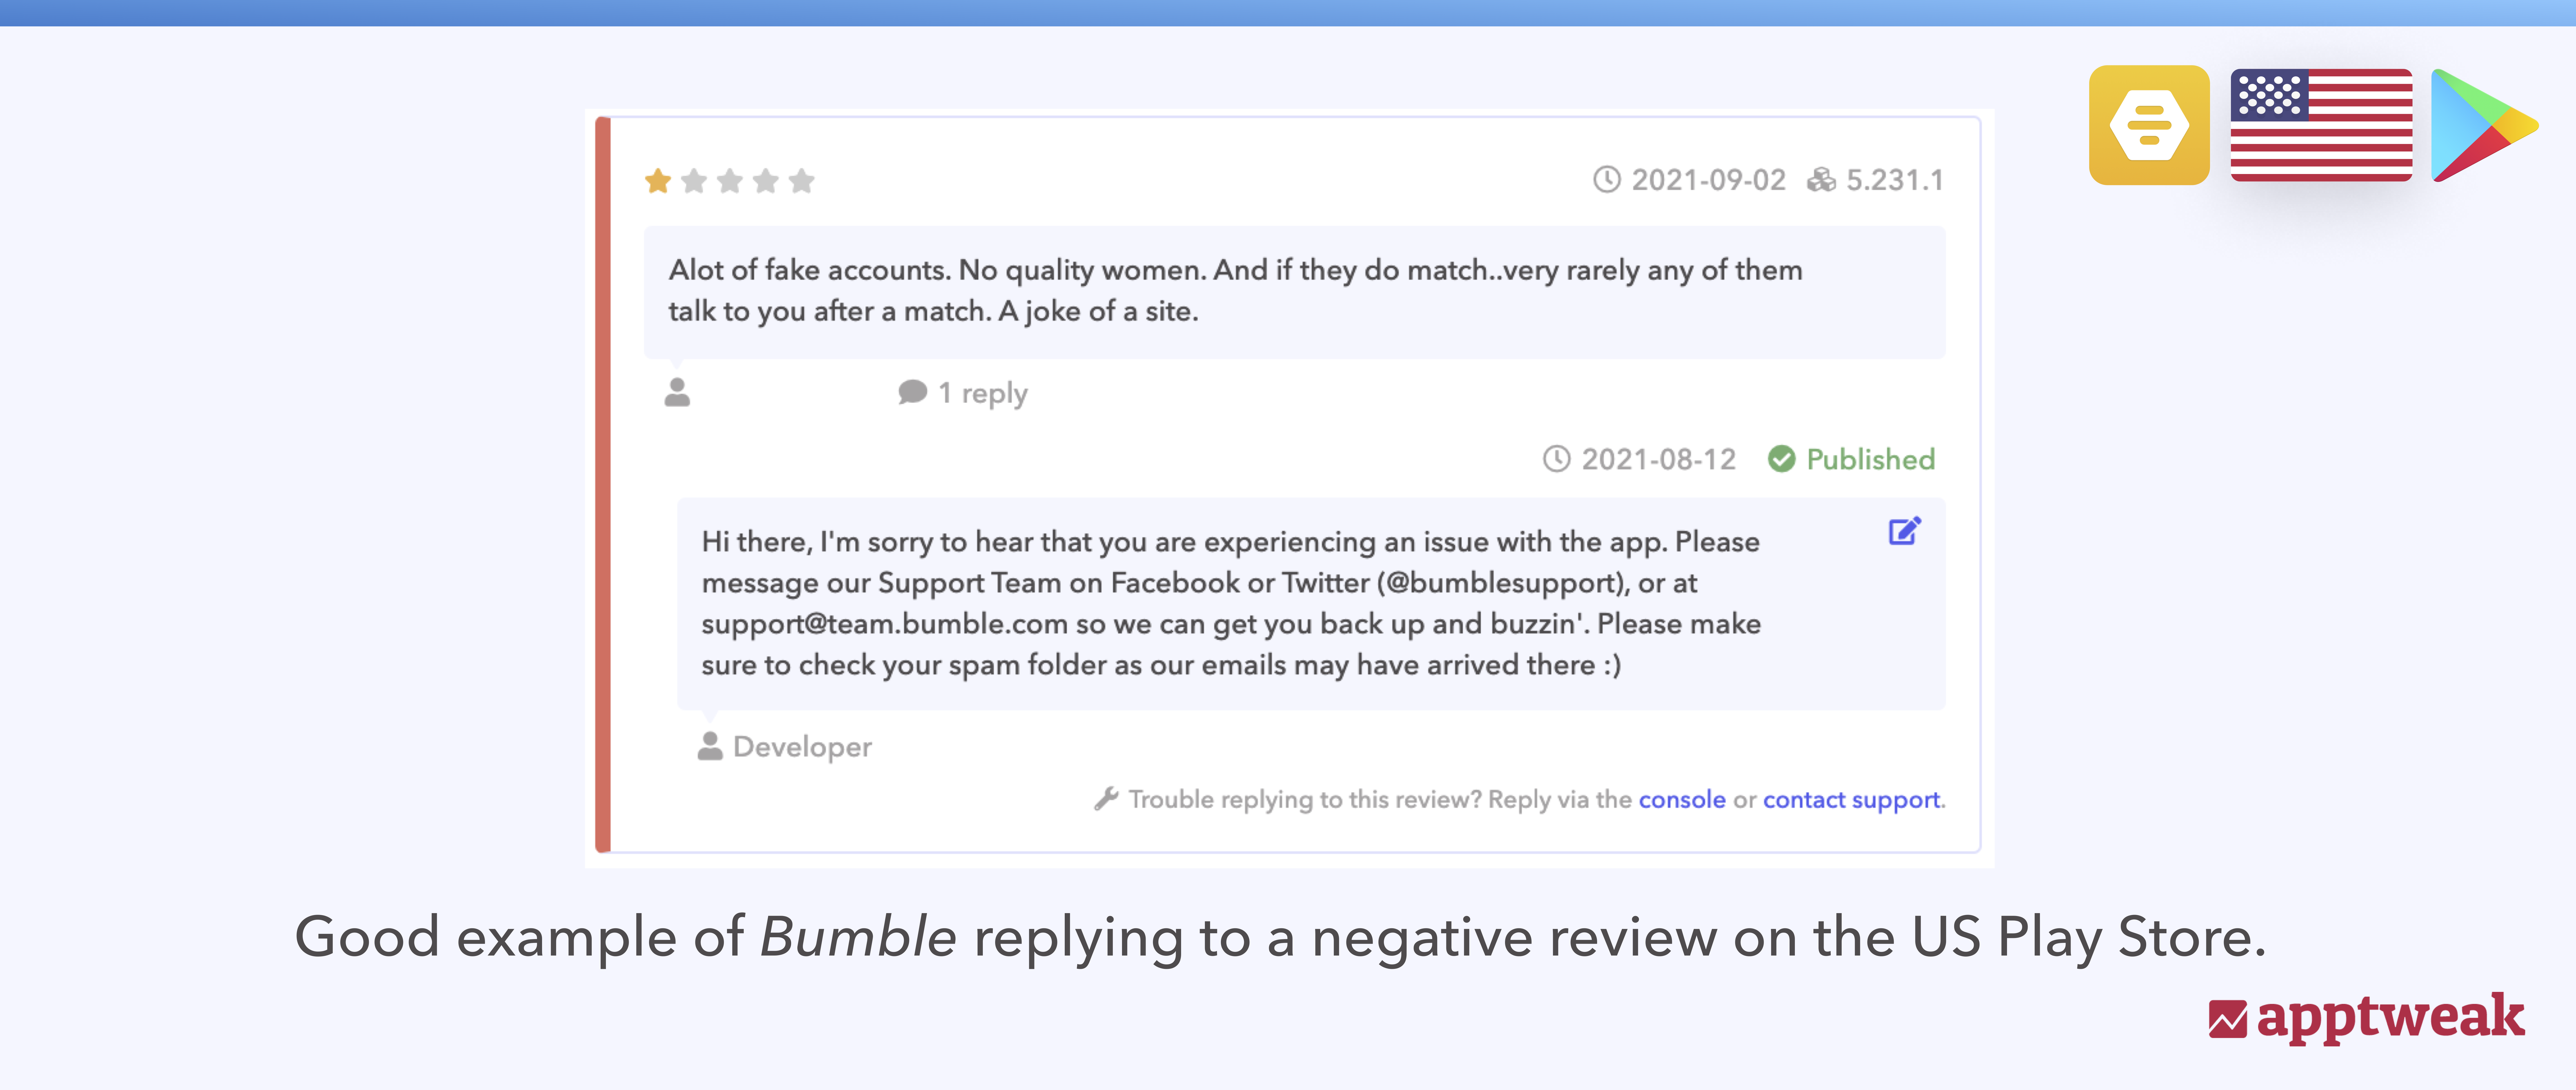 Good example of Bumble replying to a negative review